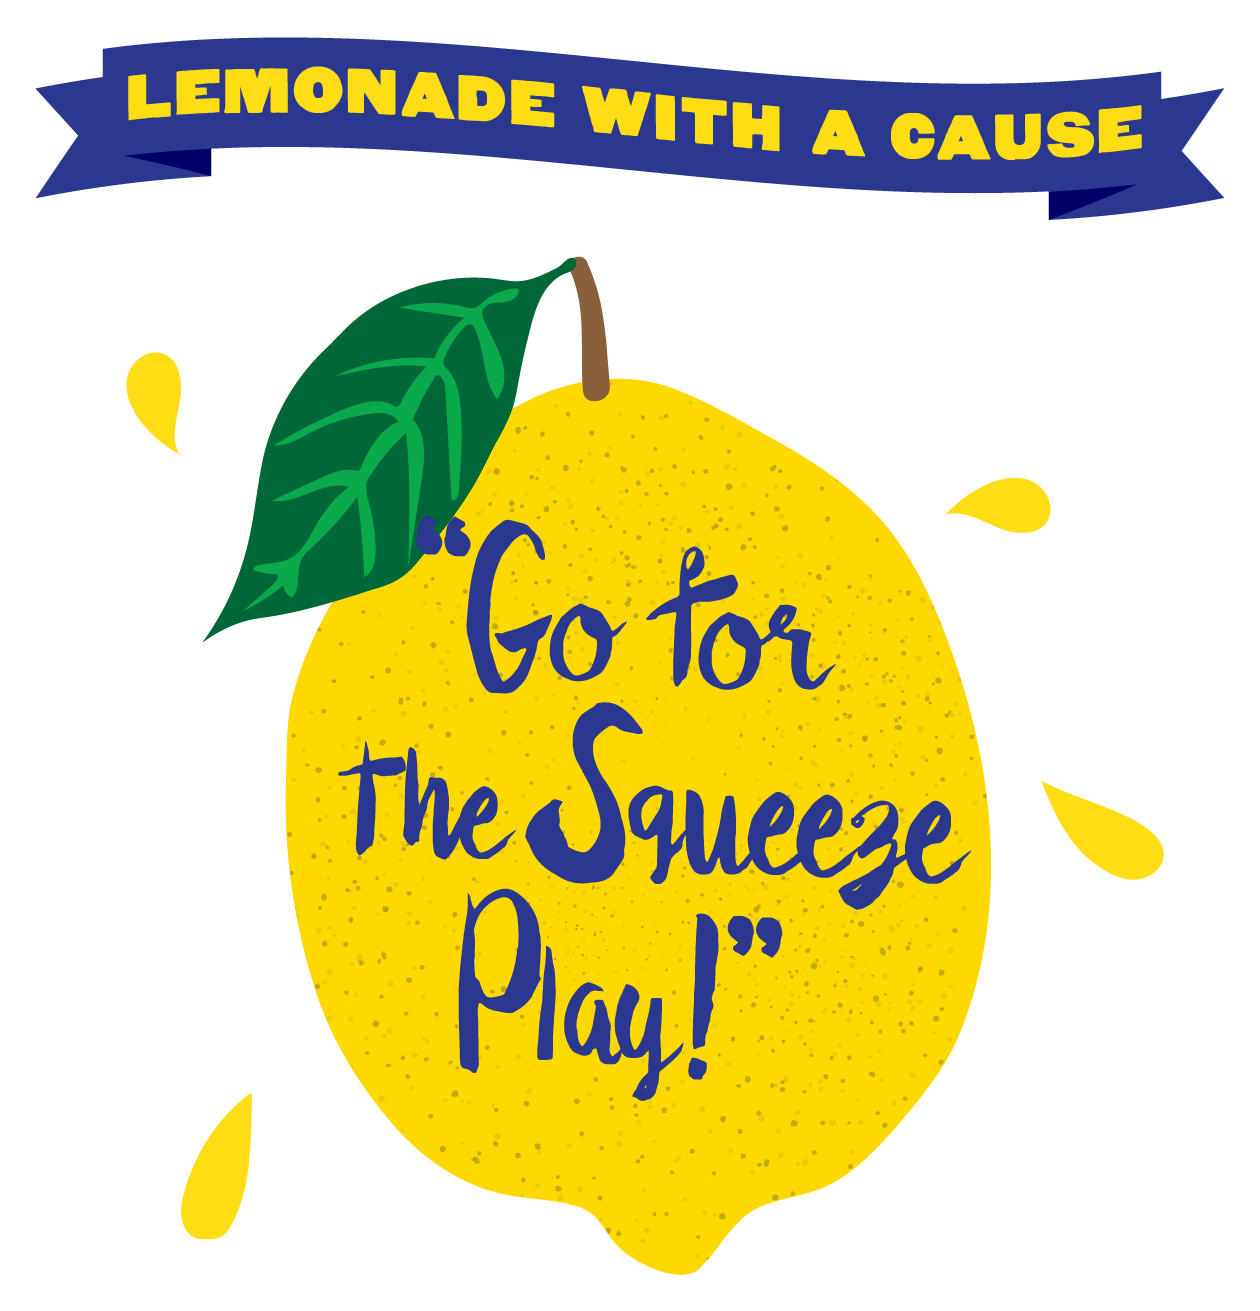 Go for the squeeze play!